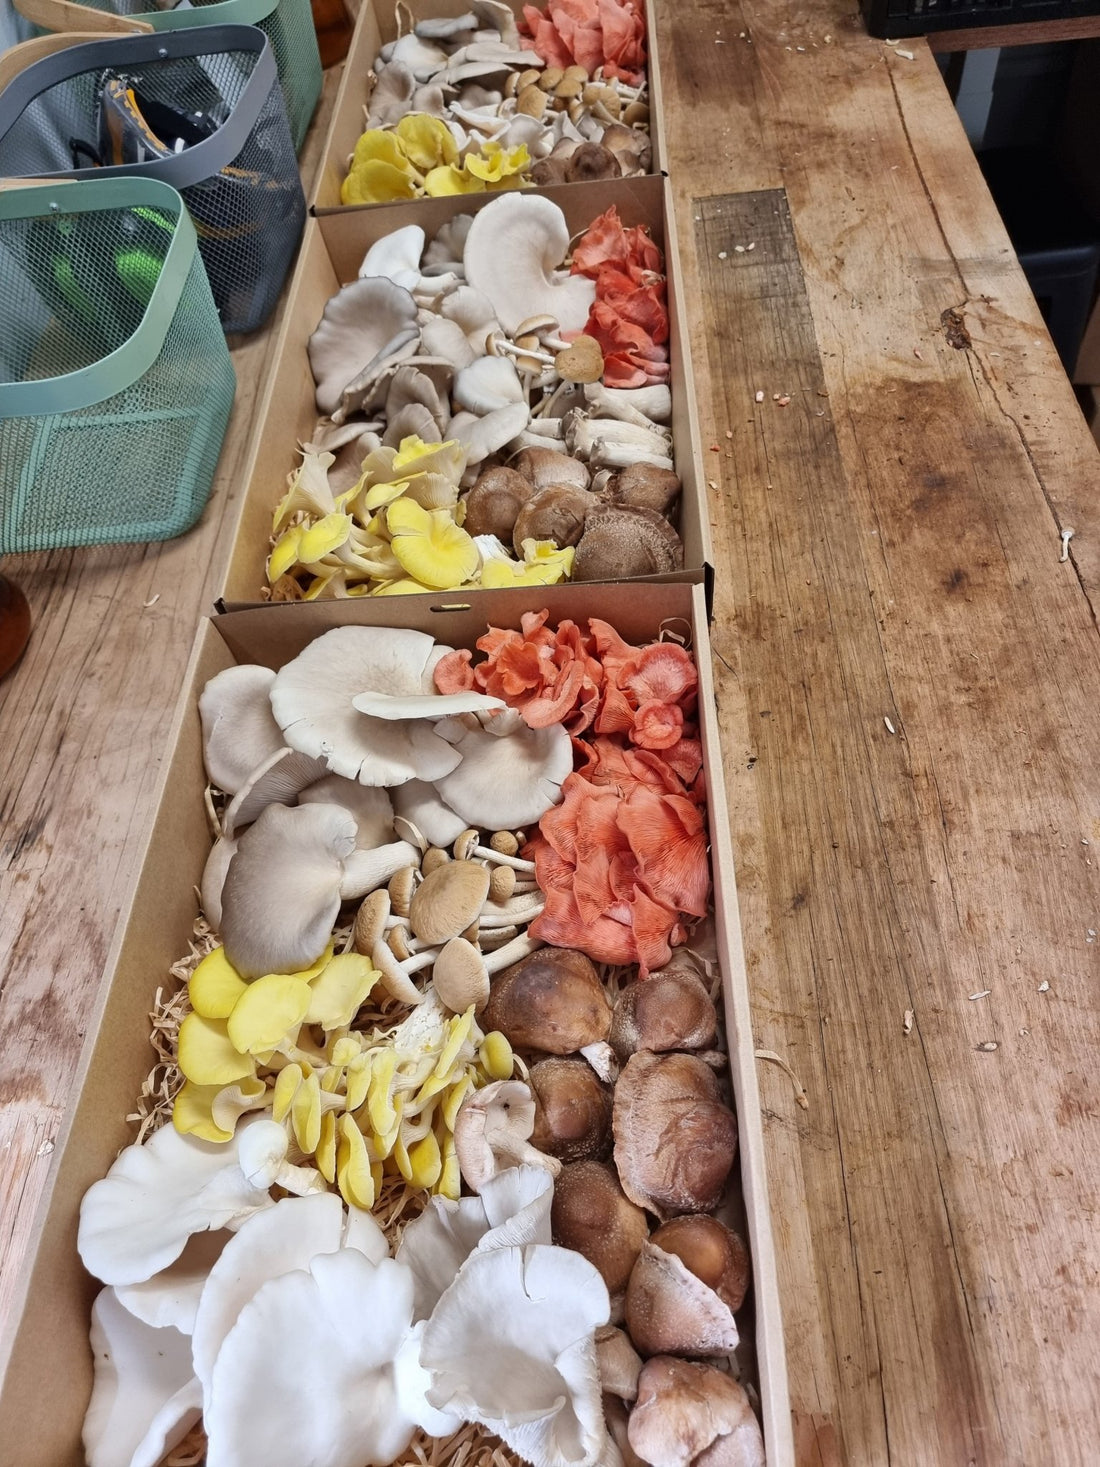 Identifying Edible Mushrooms Safely: A Comprehensive Guide - Xotic Mushrooms